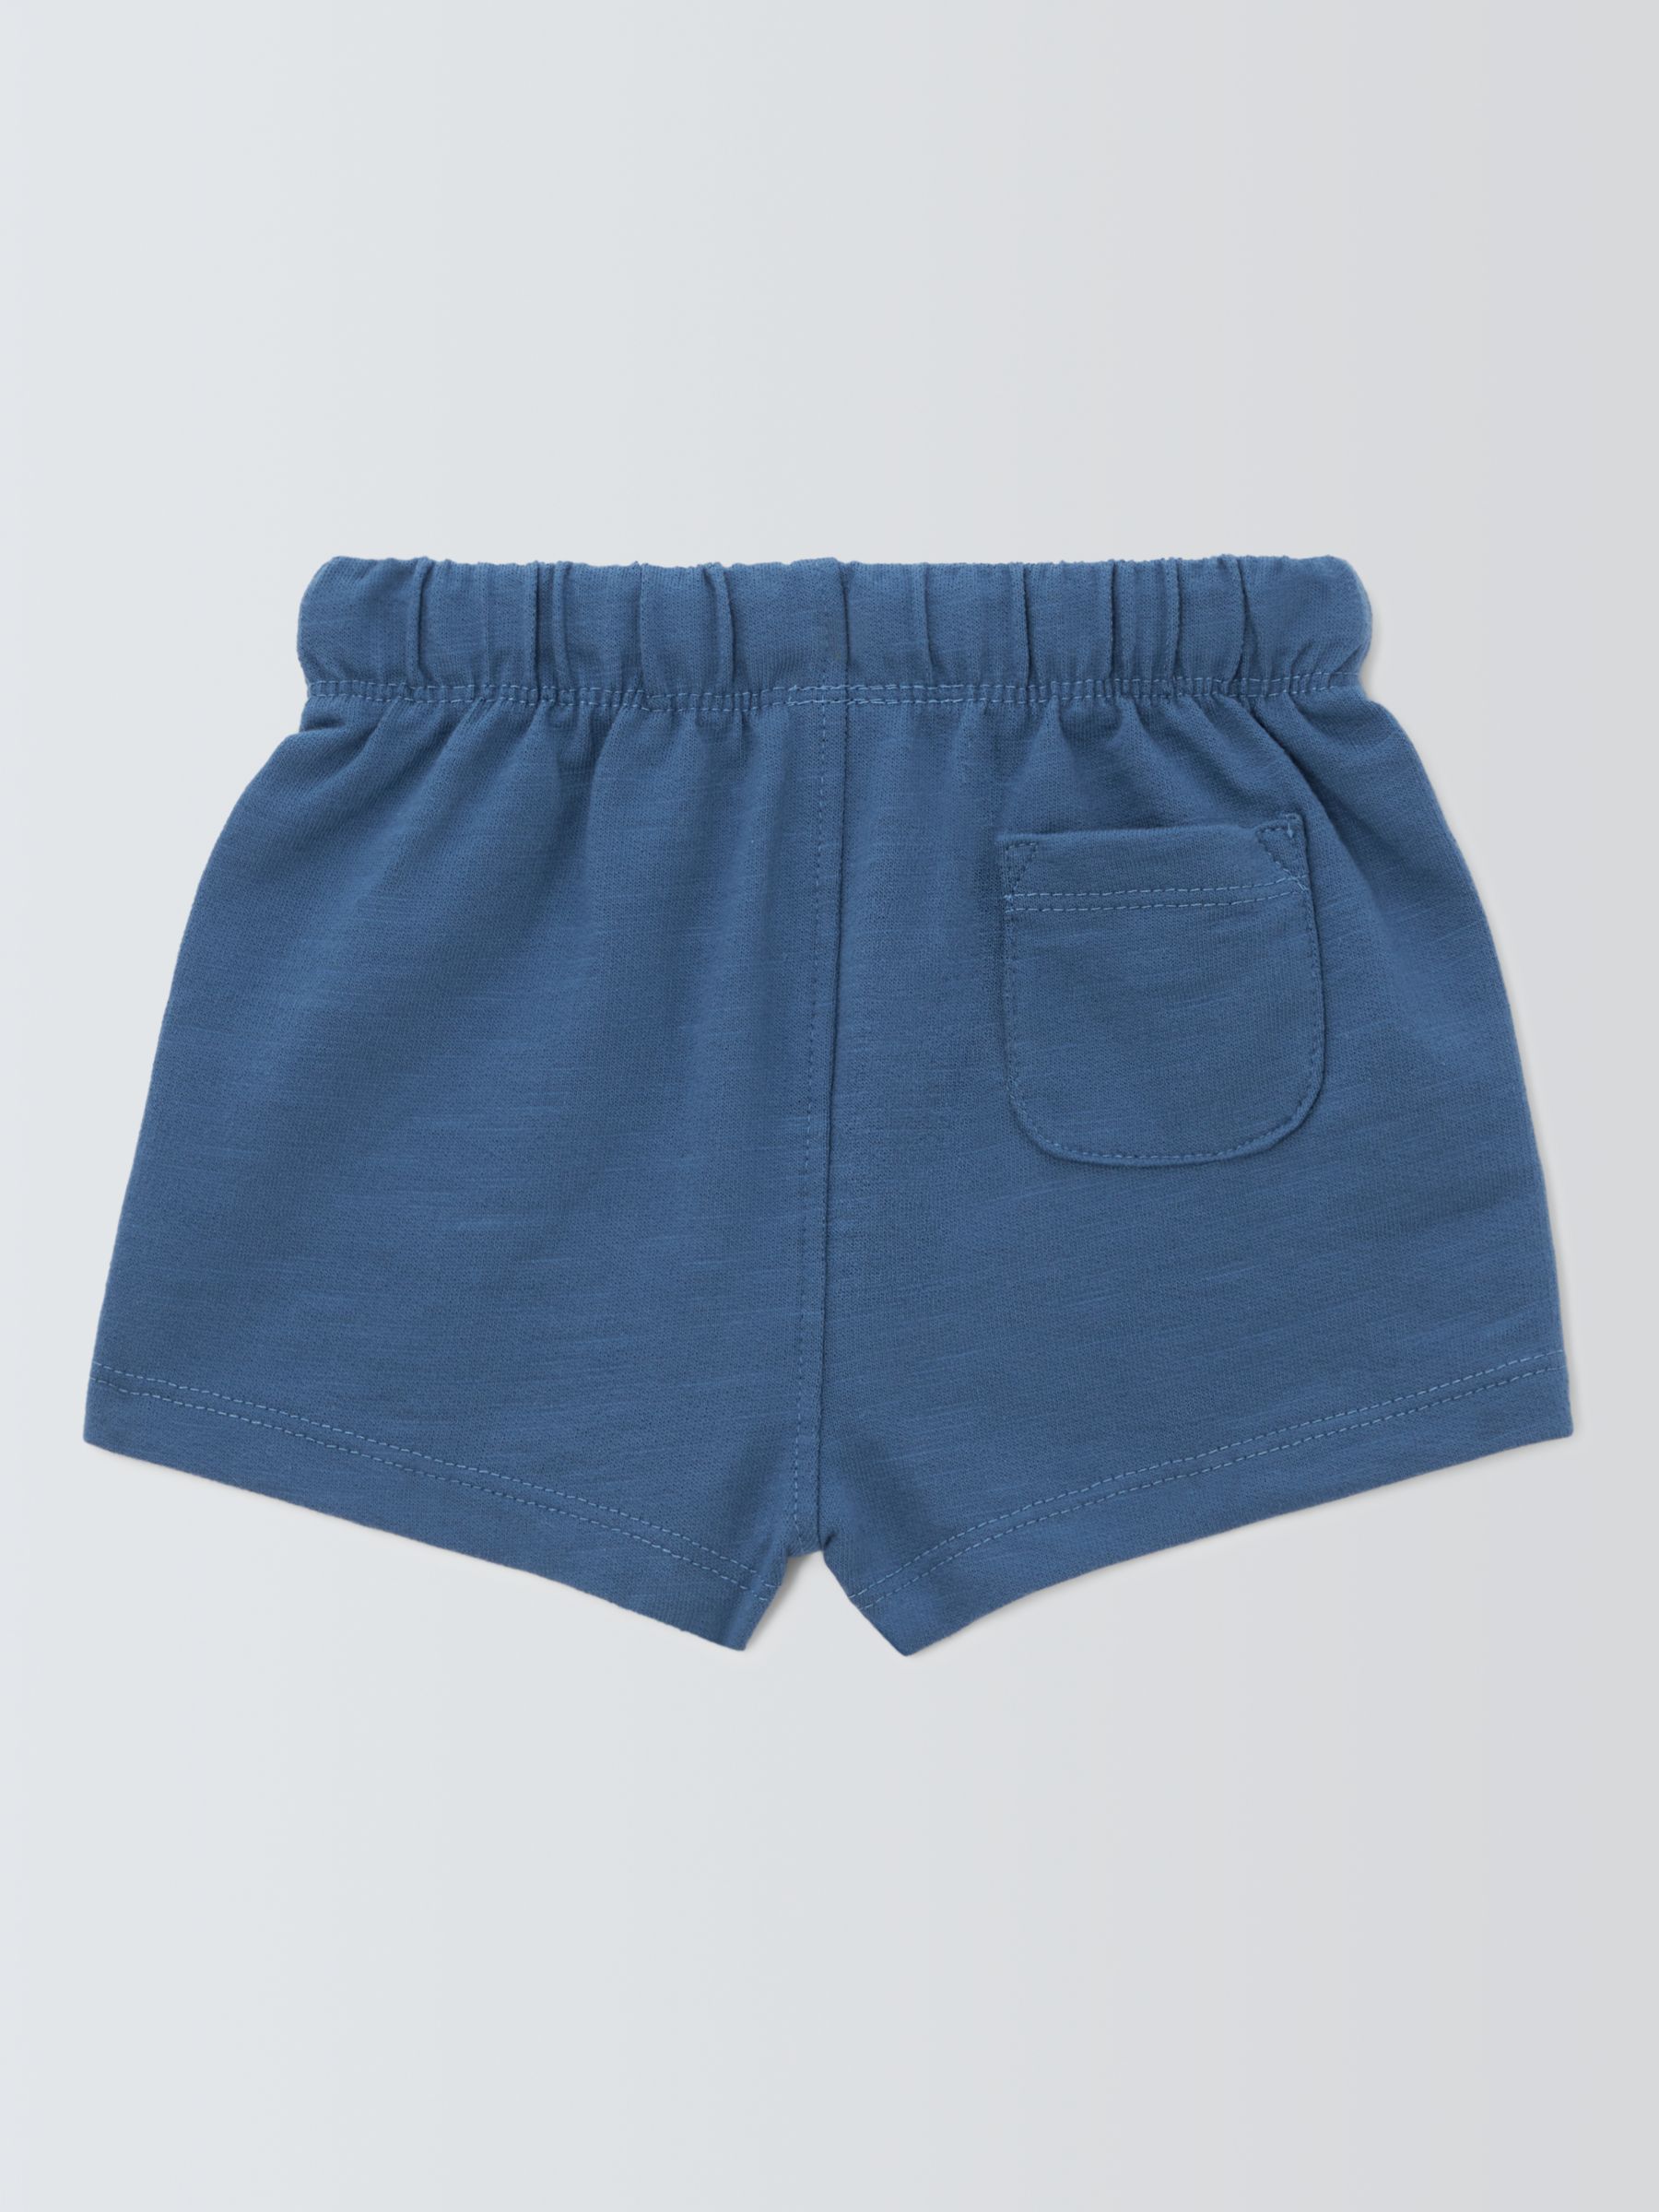 John Lewis ANYDAY Baby Sweat Shorts, Blue, 18-24 months